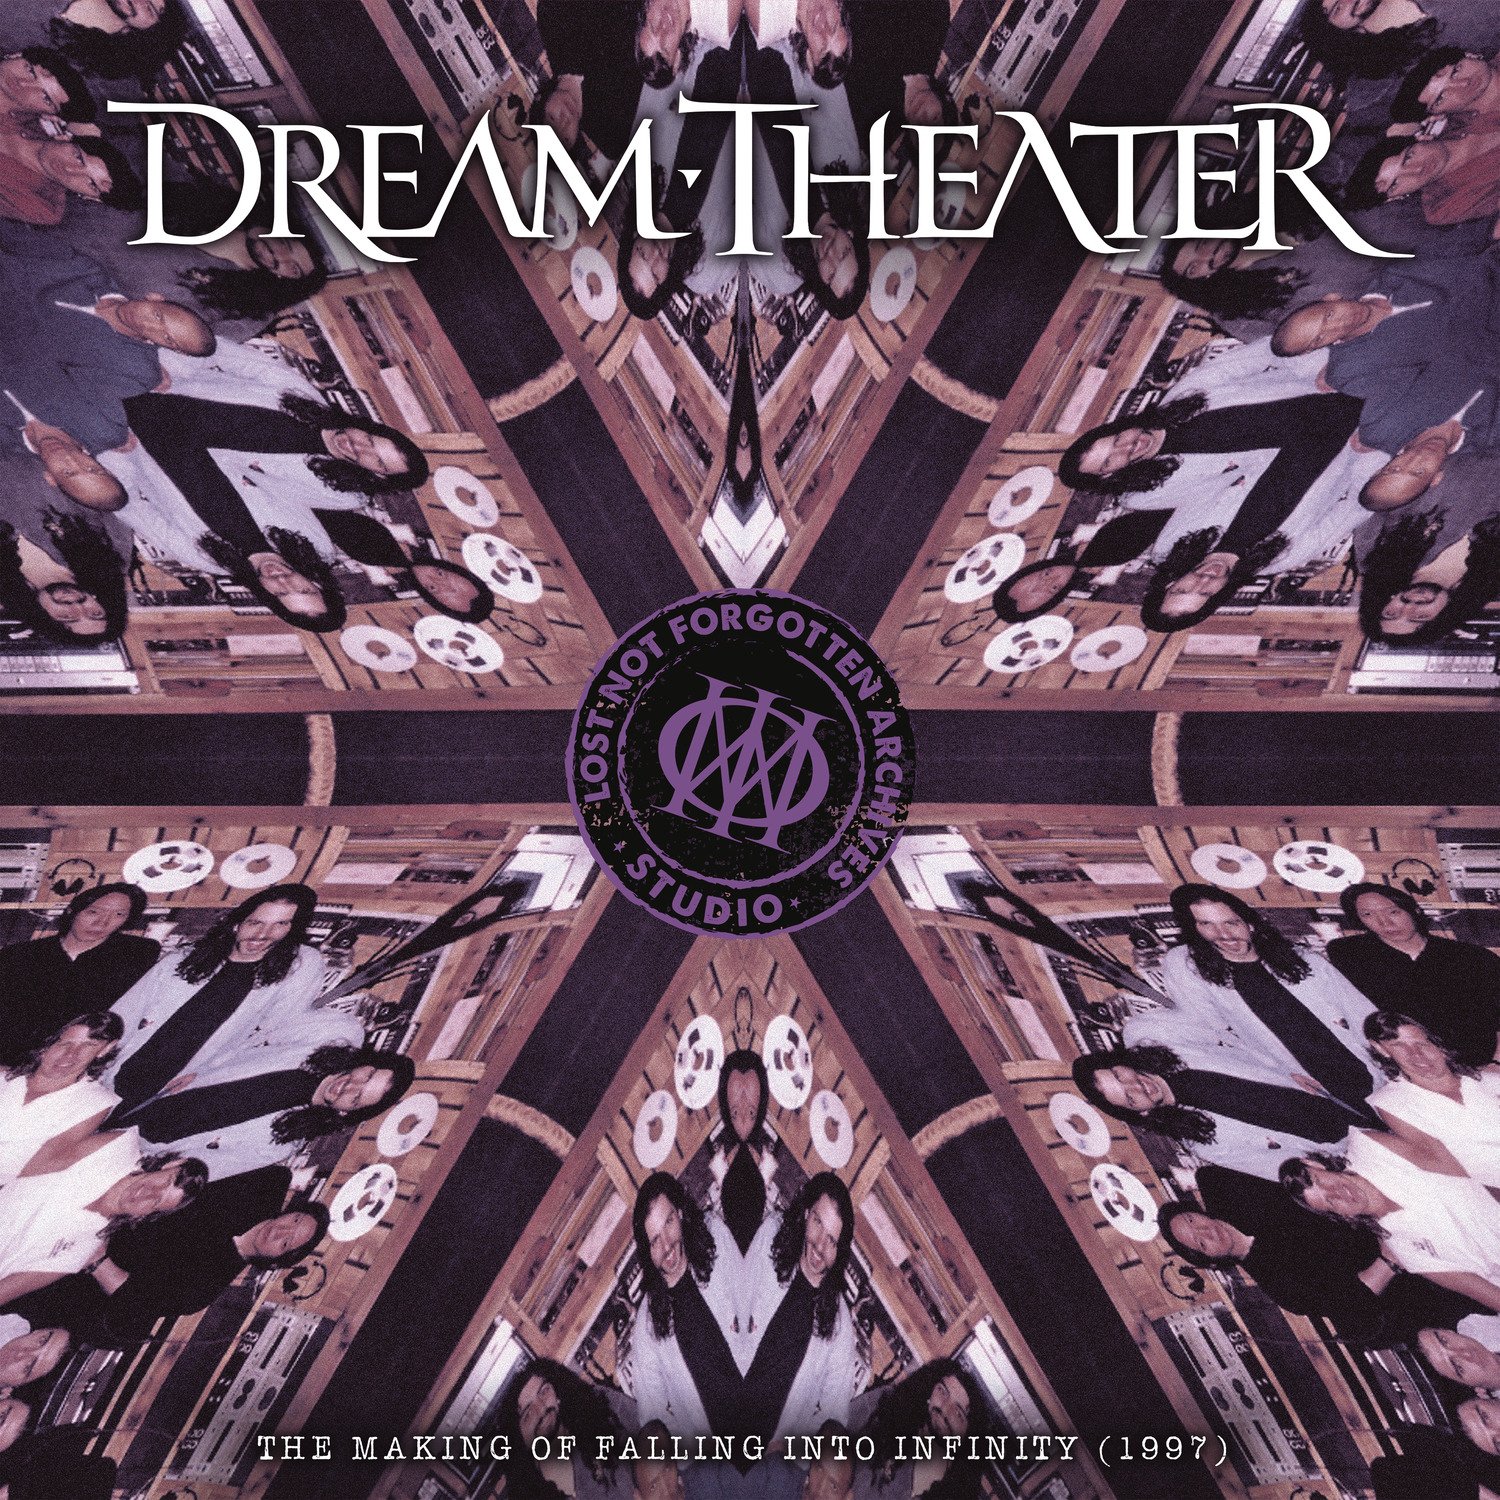 CD Shop - DREAM THEATER LOST NOT FORGOTTEN ARCHIVES: THE MAKING OF FALLING INTO INFINITY (1997) -LTD-